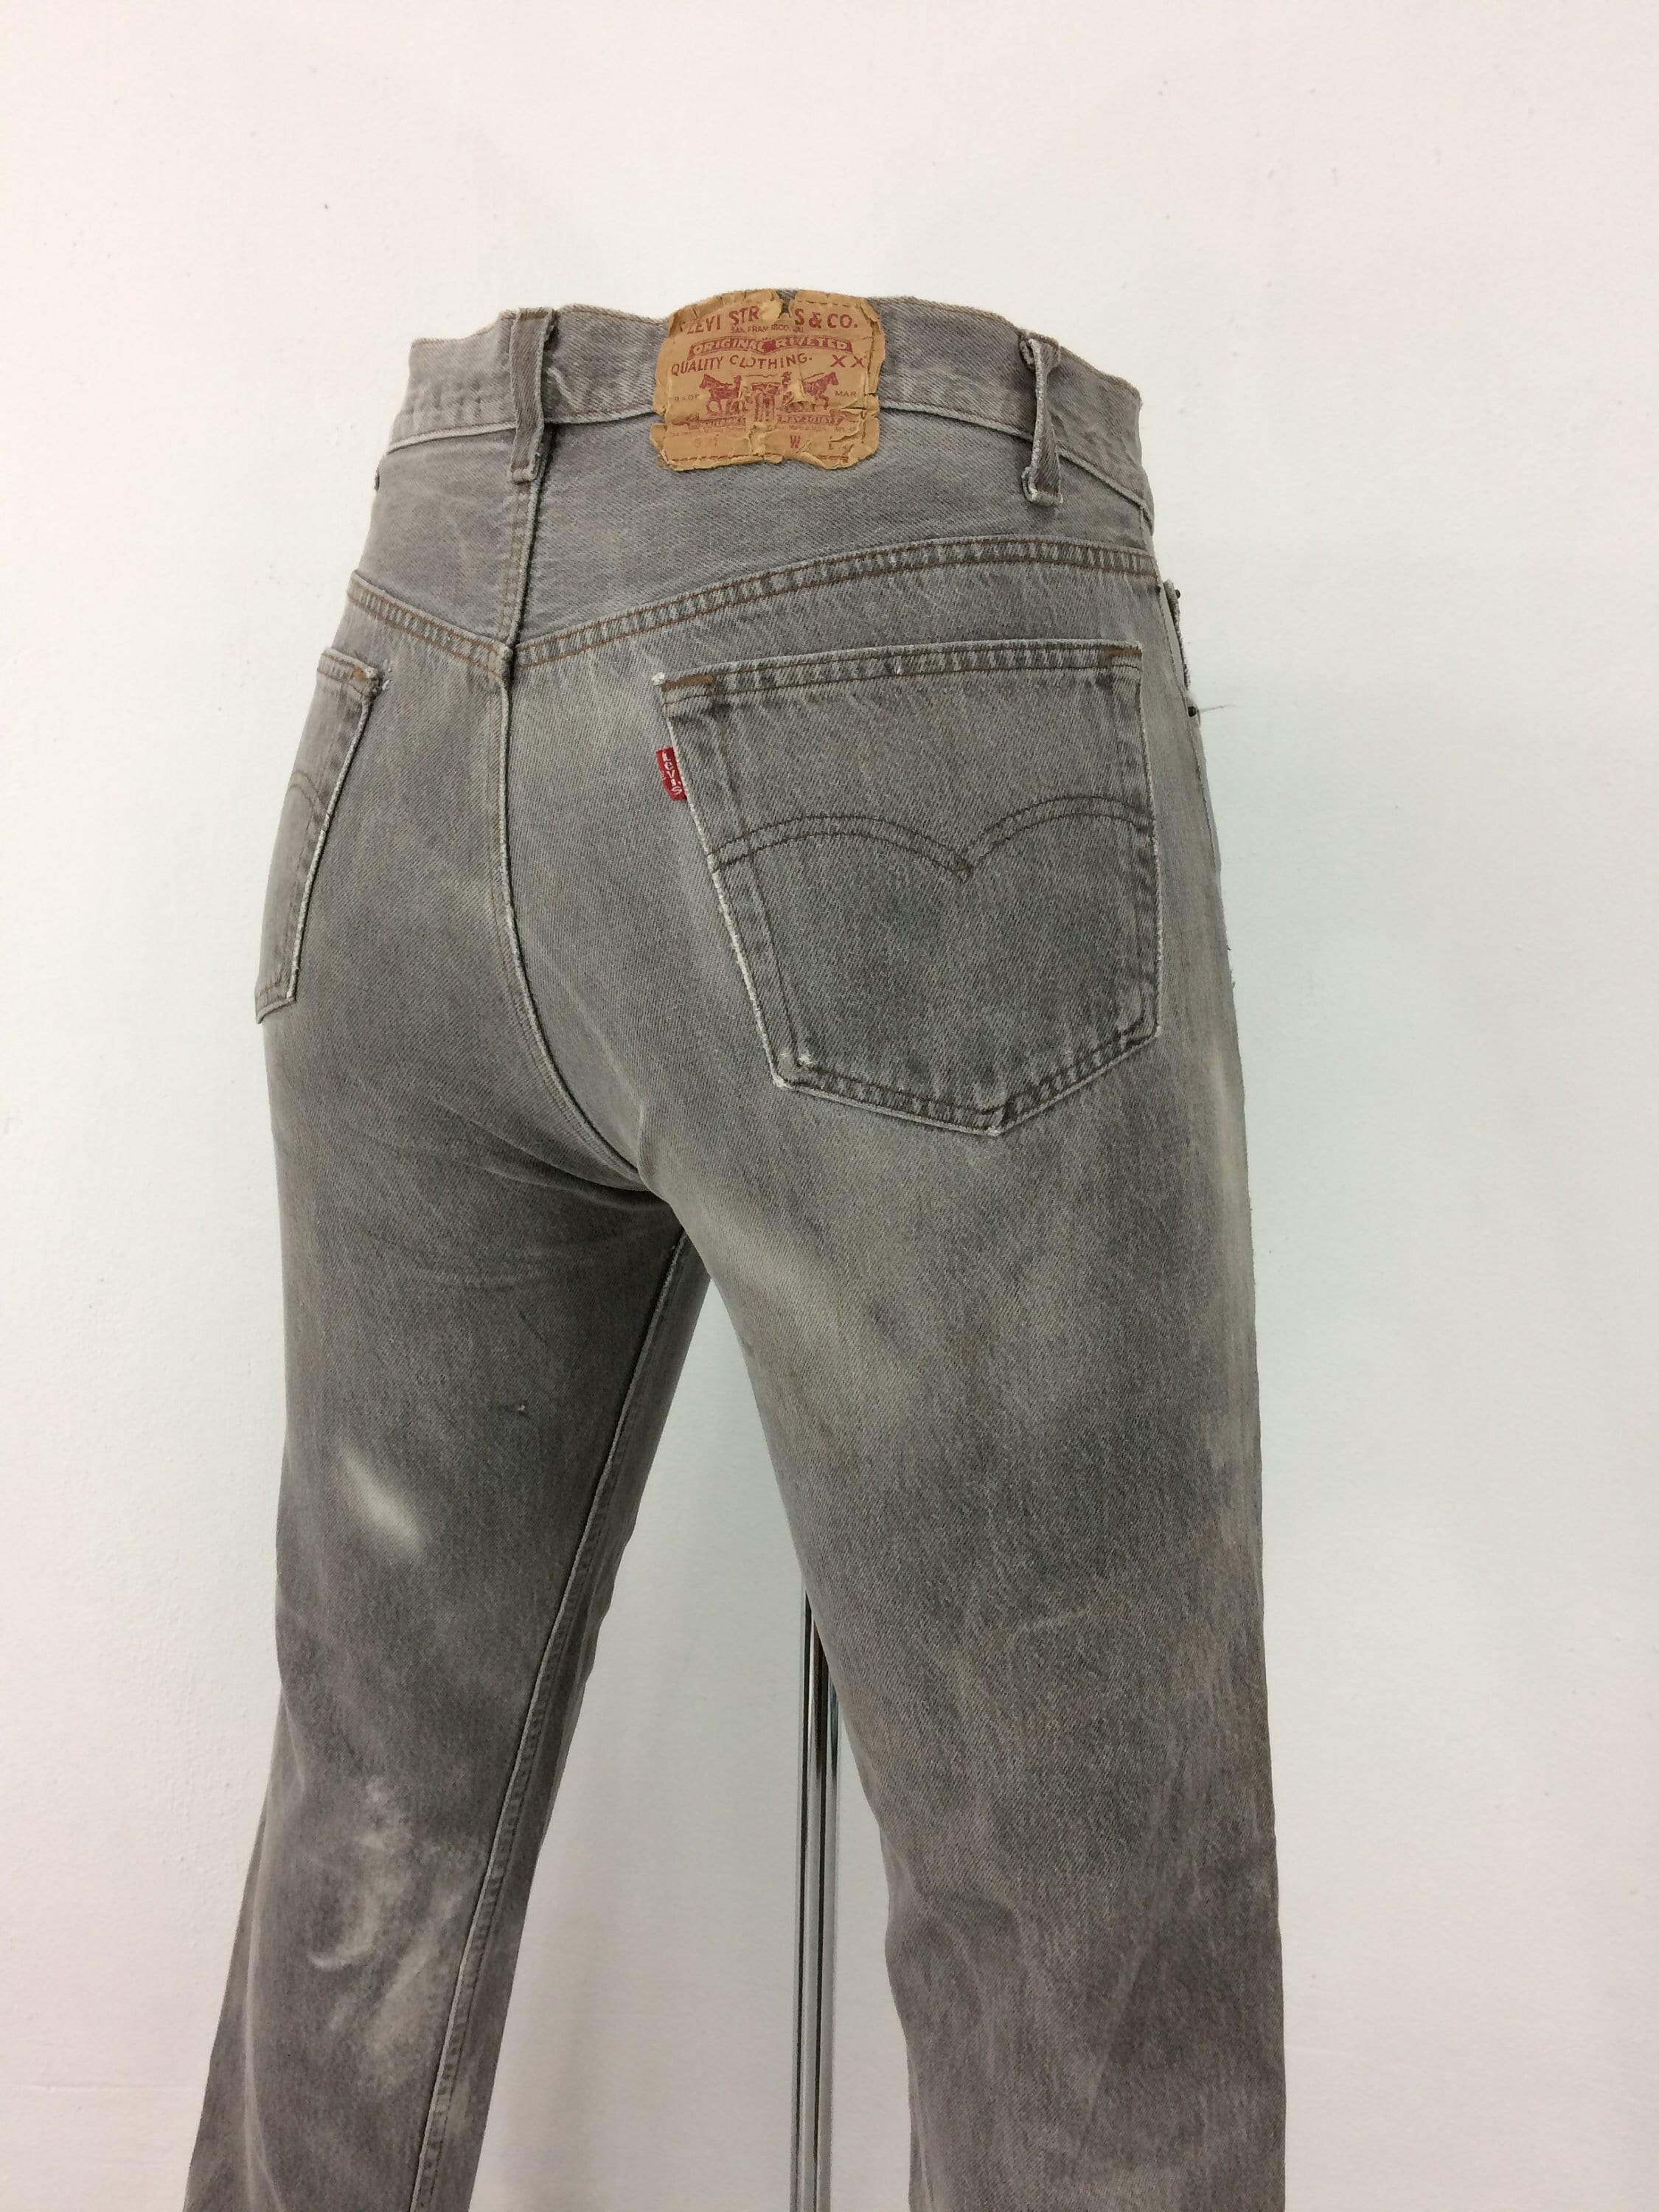 Levis 501 Gray Jeans - Etsy